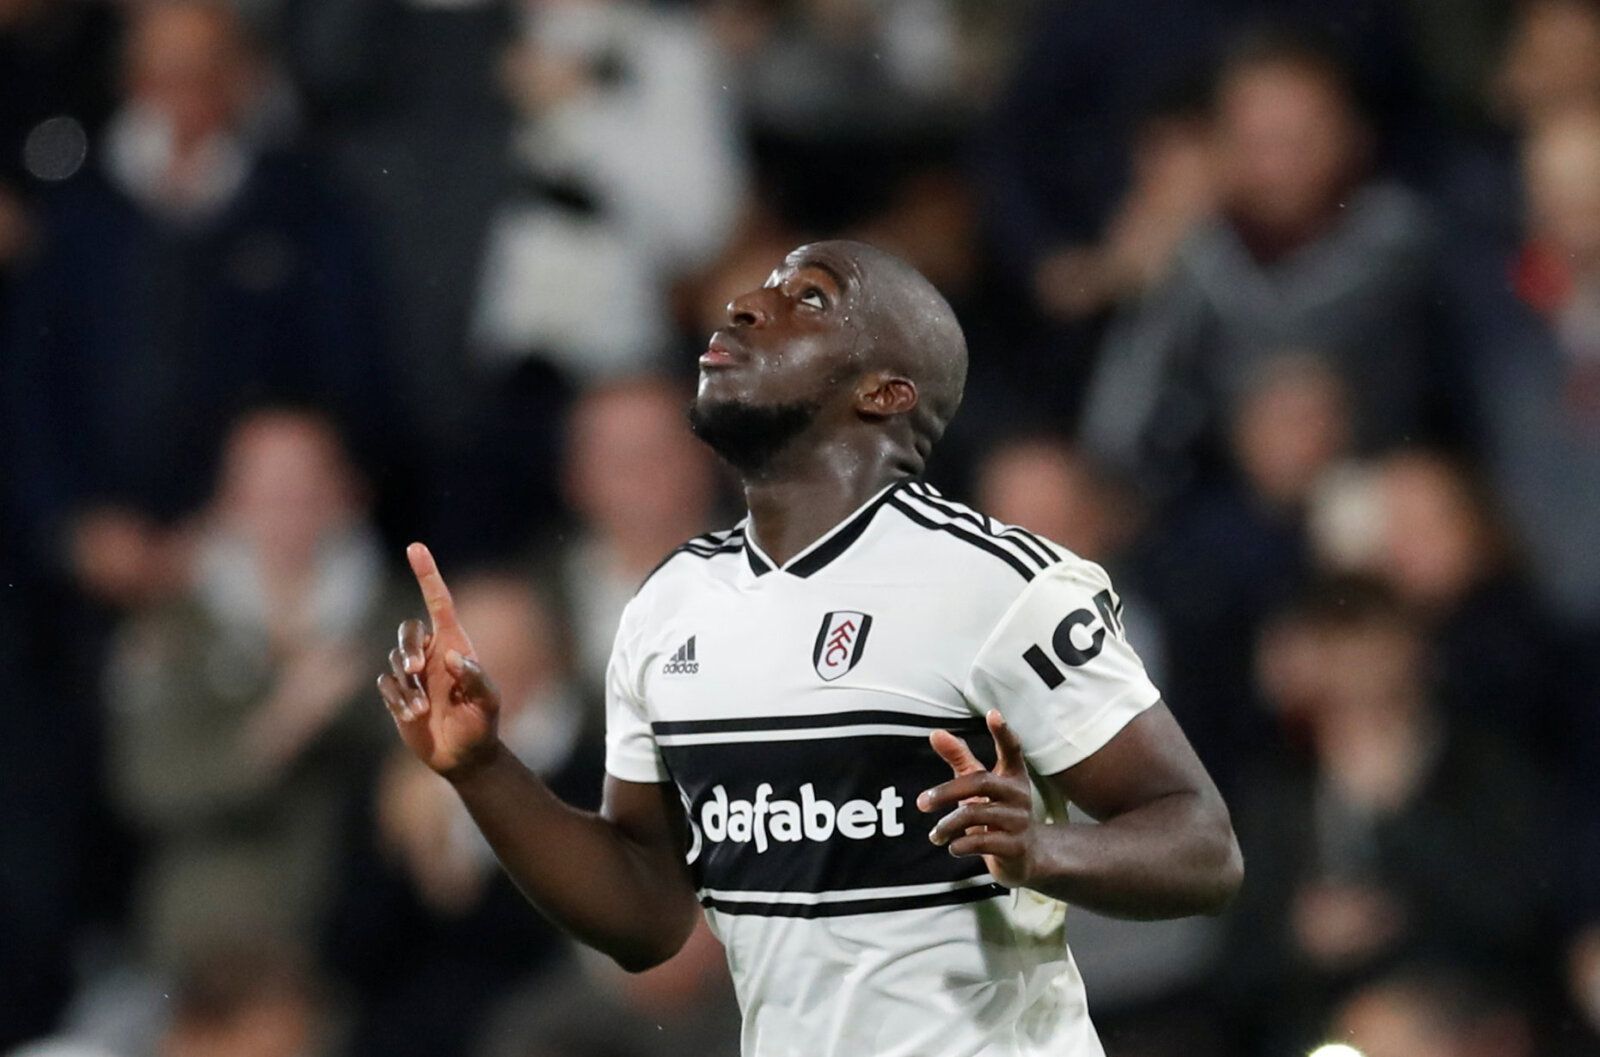 Soccer Football - Premier League - Fulham v Leicester City - Craven Cottage, London, Britain - December 5, 2018  Fulham's Aboubakar Kamara celebrates scoring their first goal   REUTERS/David Klein  EDITORIAL USE ONLY. No use with unauthorized audio, video, data, fixture lists, club/league logos or 